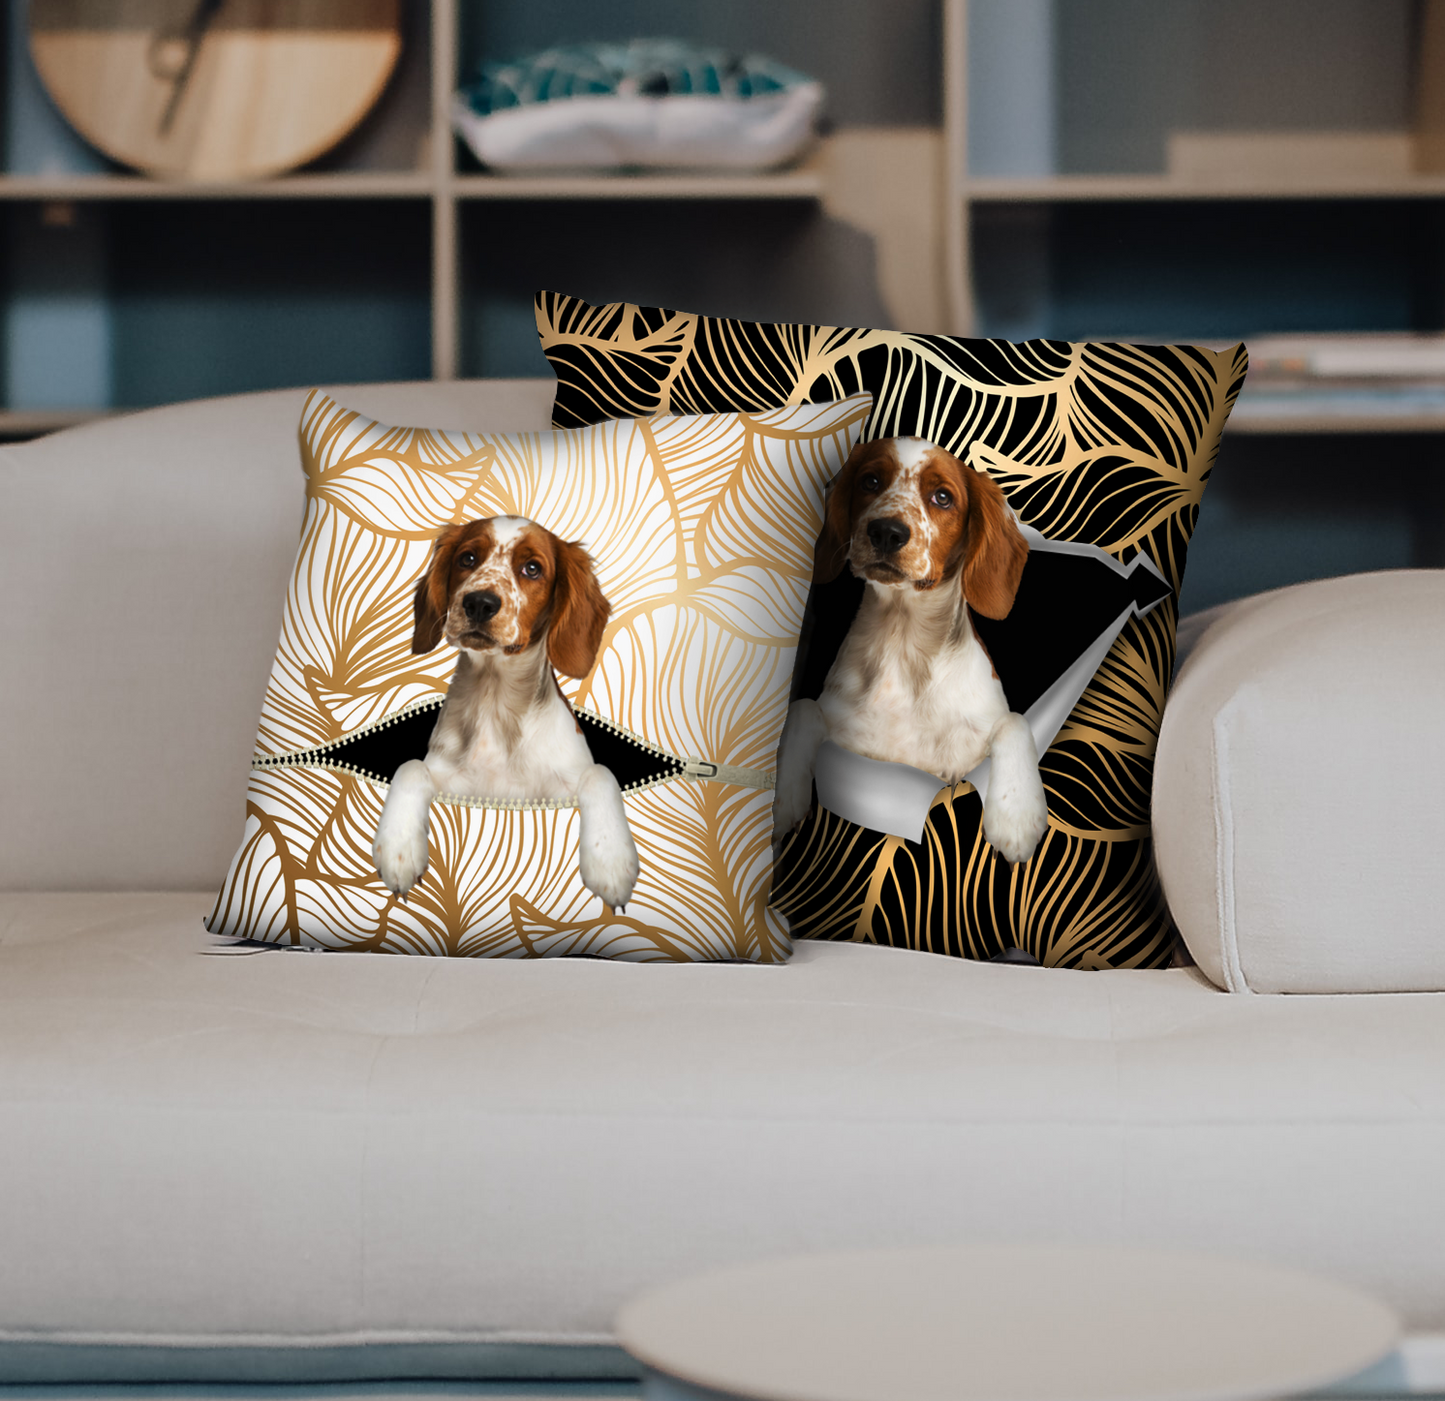 They Steal Your Couch - Welsh Springer Spaniel Pillow Cases V1 (Set of 2)